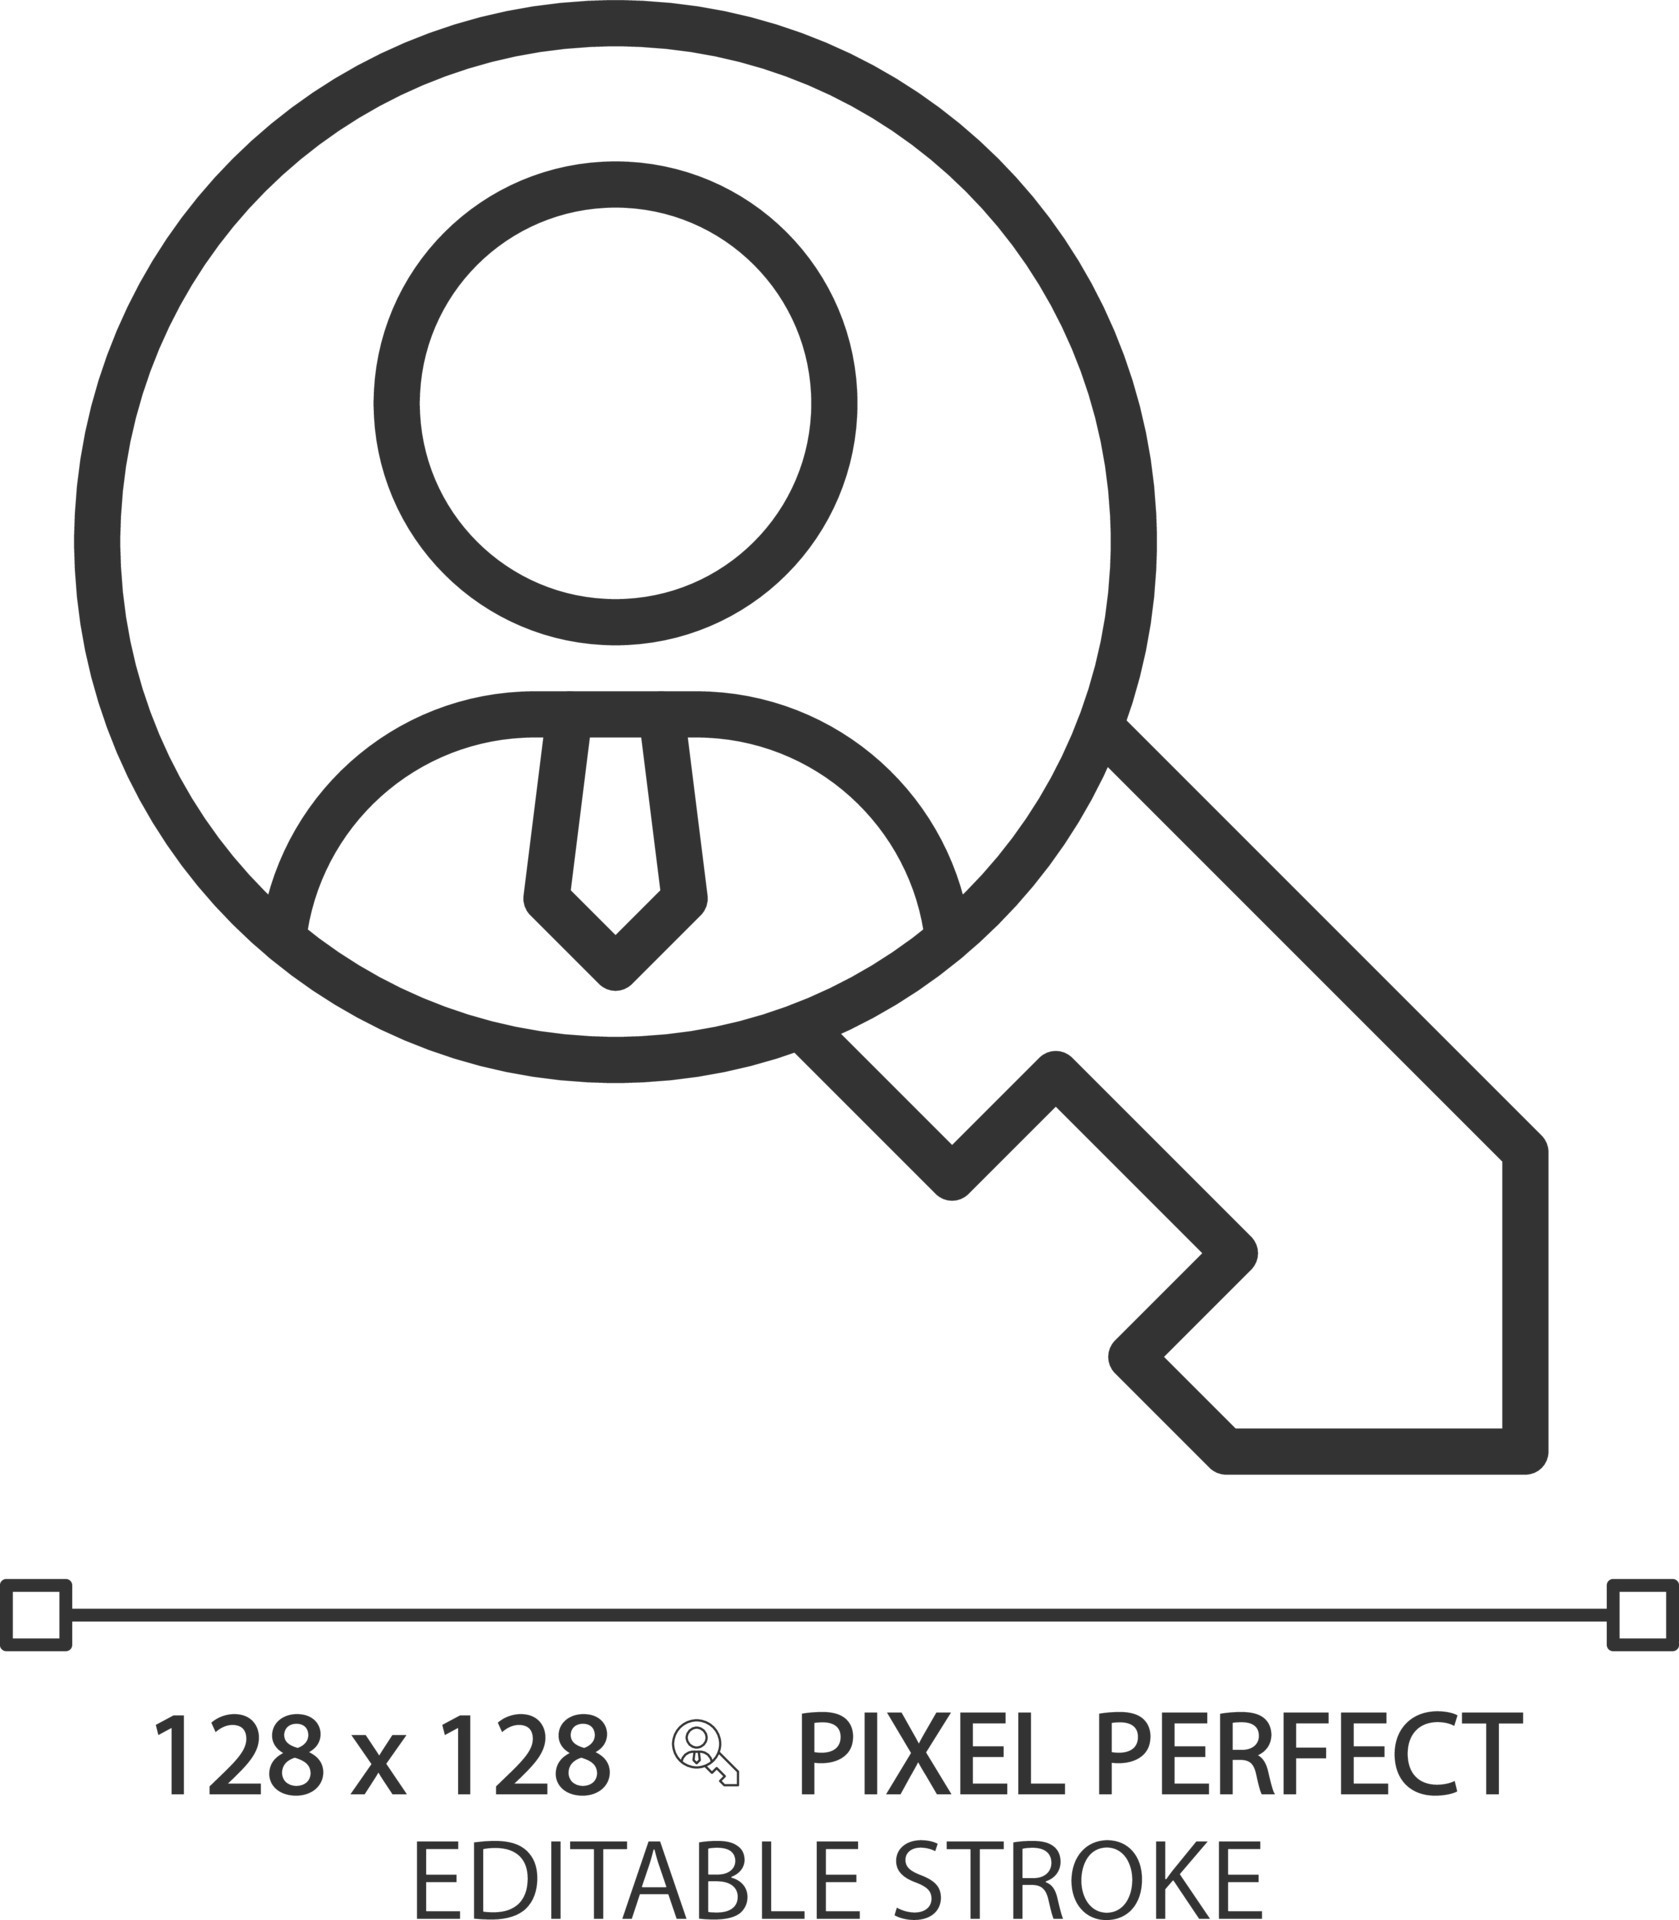 Key person pixel perfect linear icon. Important qualified employee